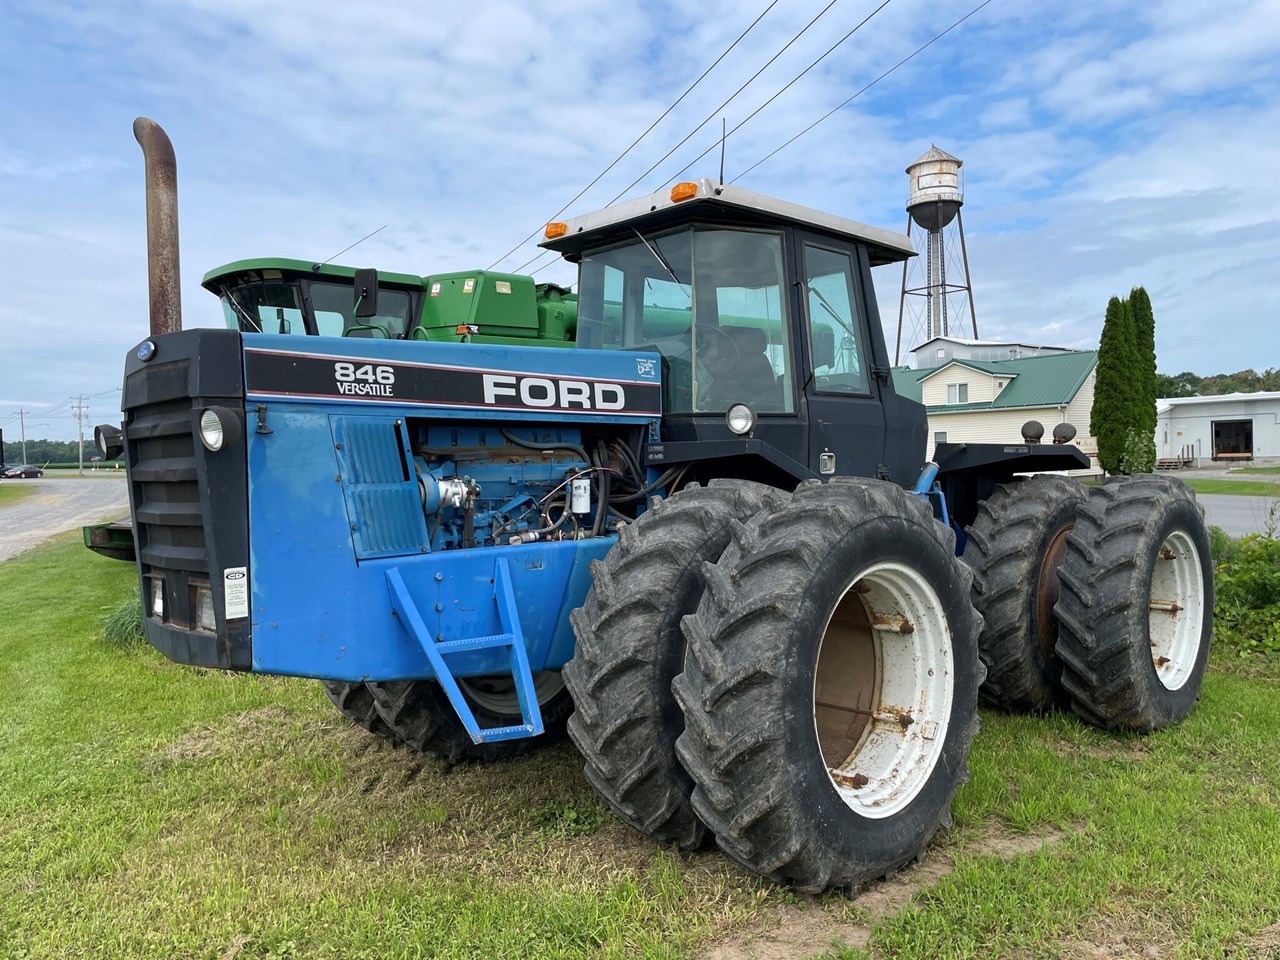 1993 Ford Versatile 846 Tractor - 4WD For Sale